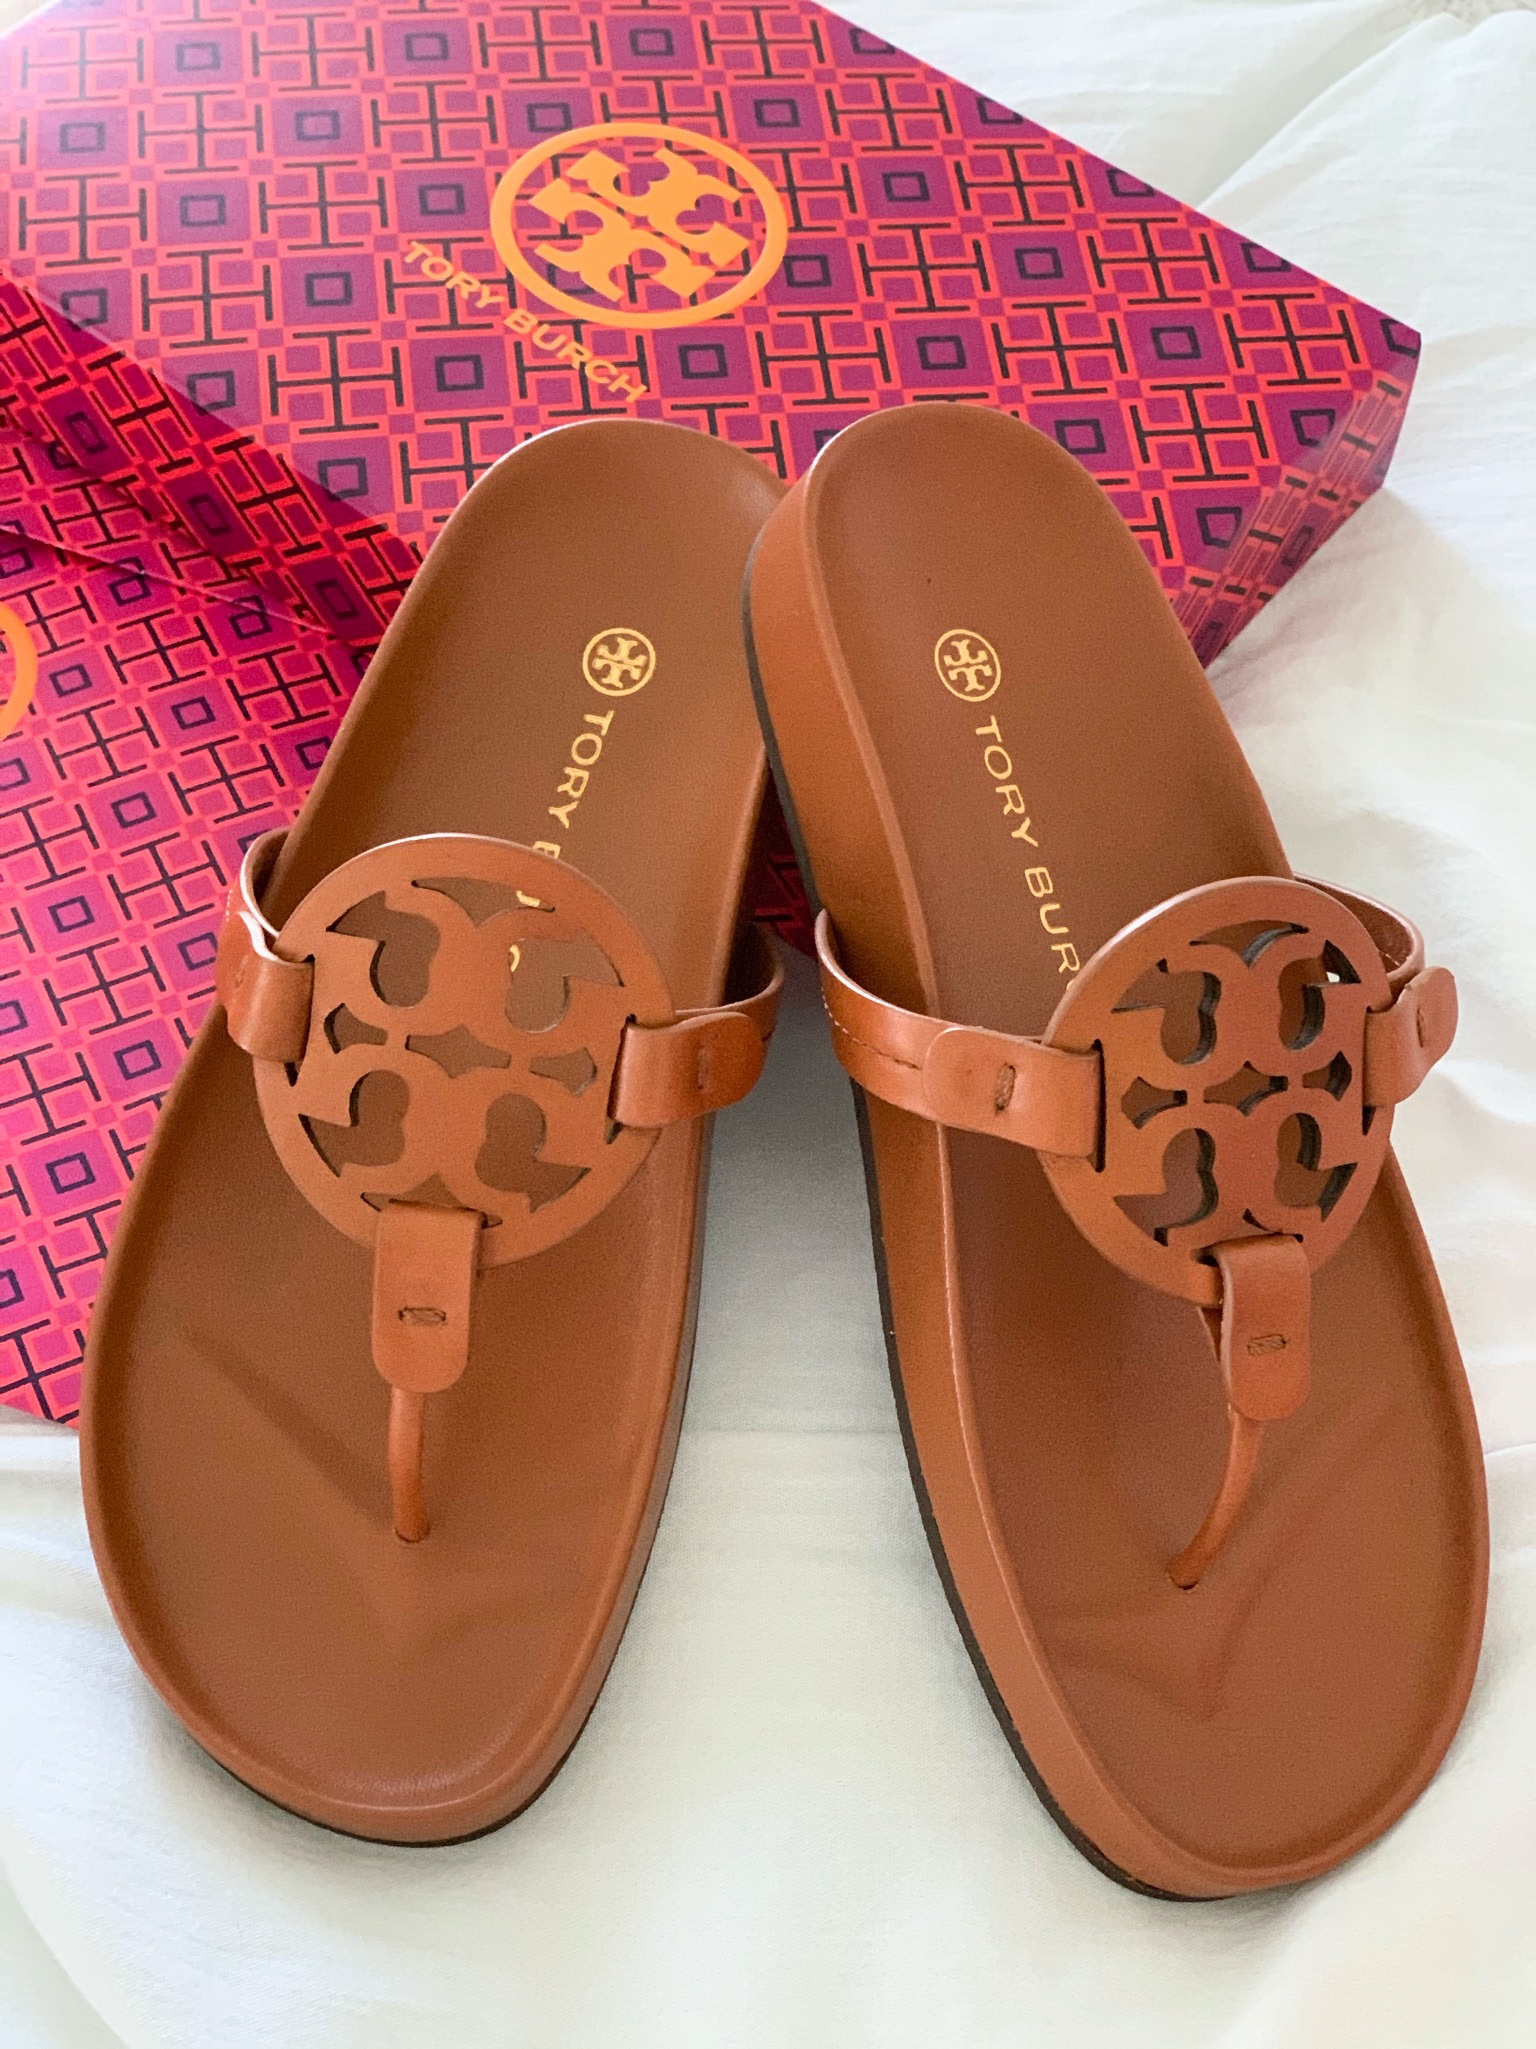 Buy the Tory Burch Black Leather Sandals US 7